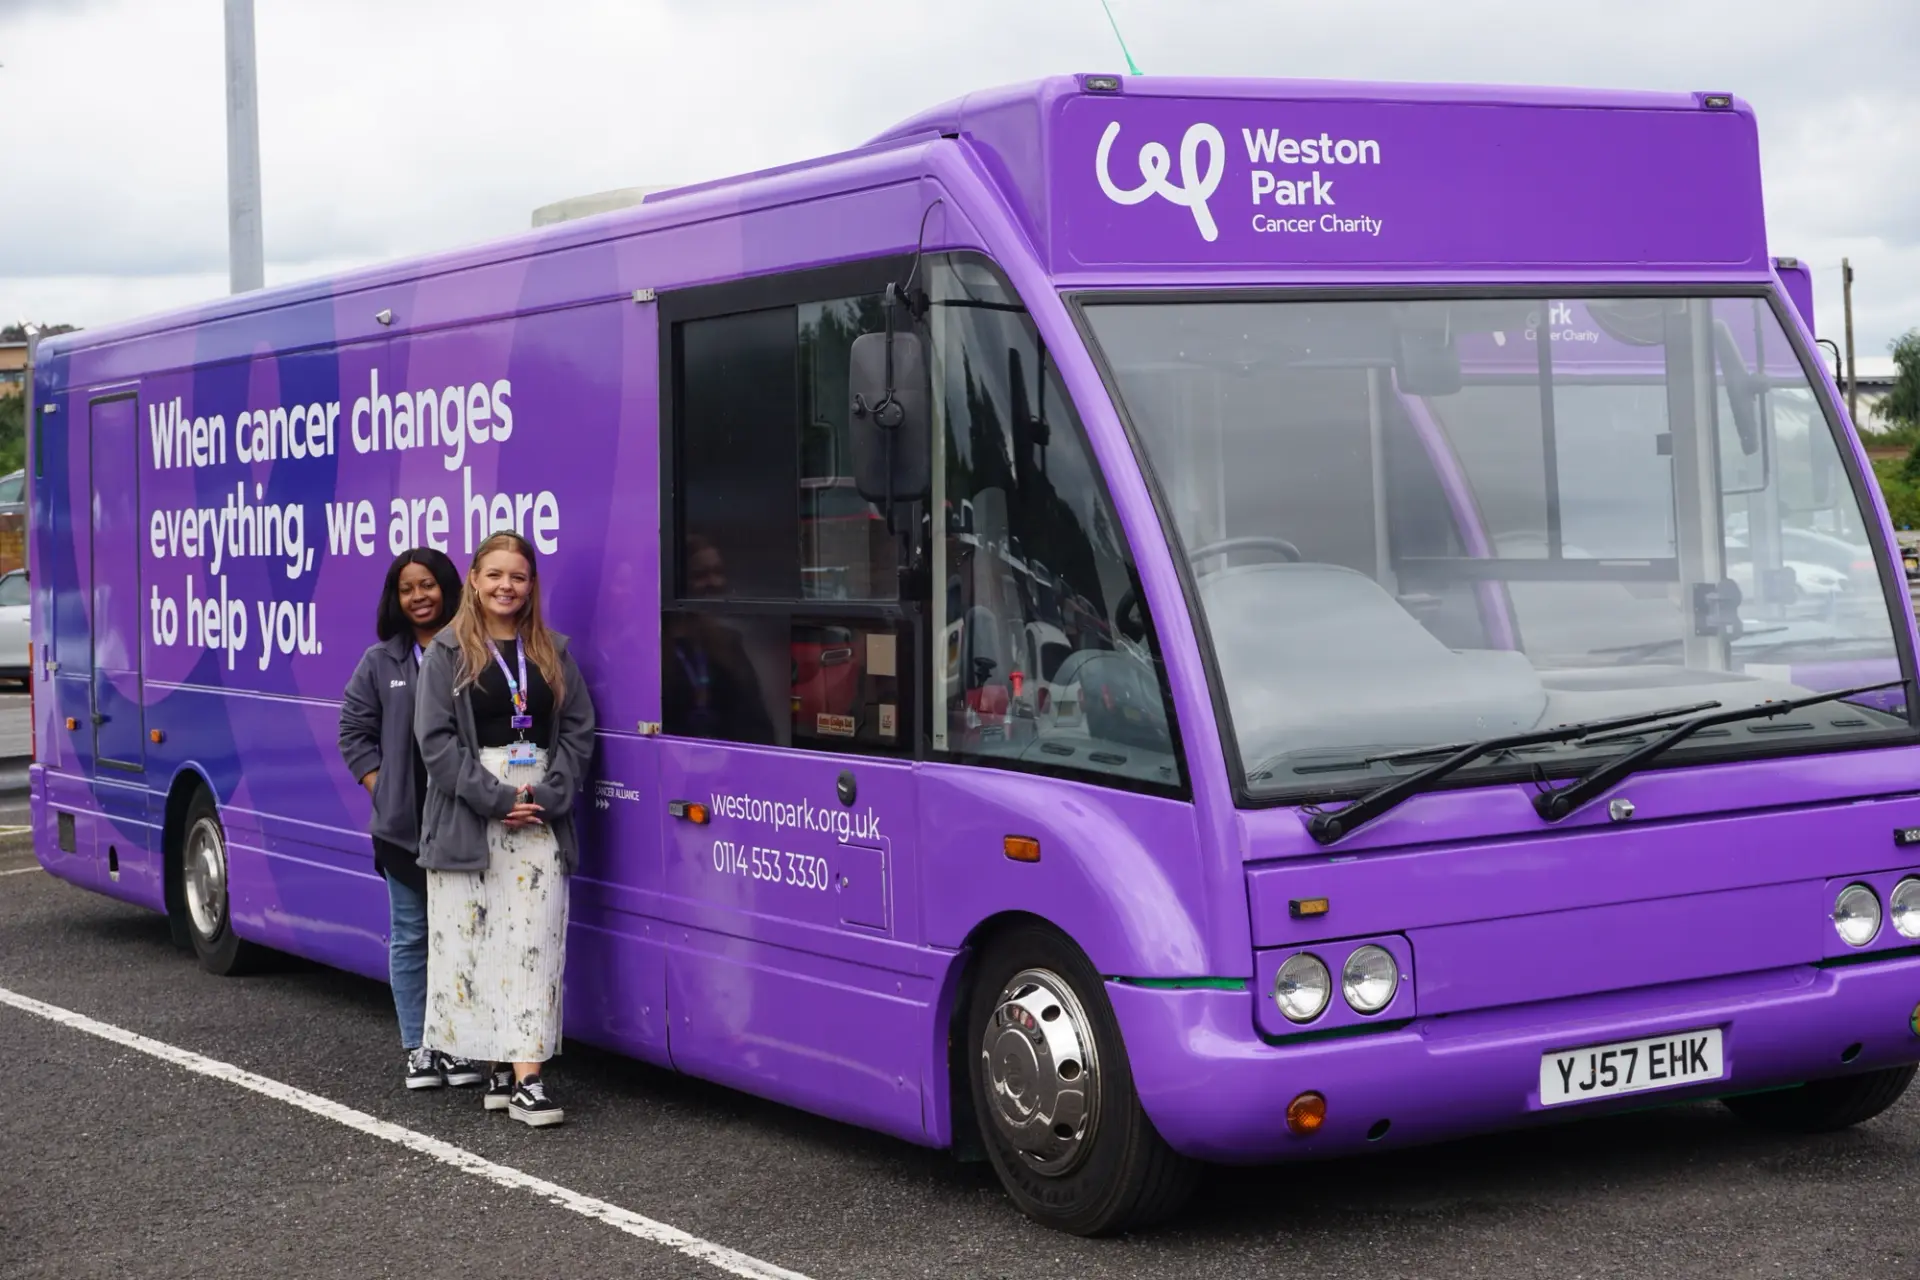 A big purple bus with the Weston park charity logo